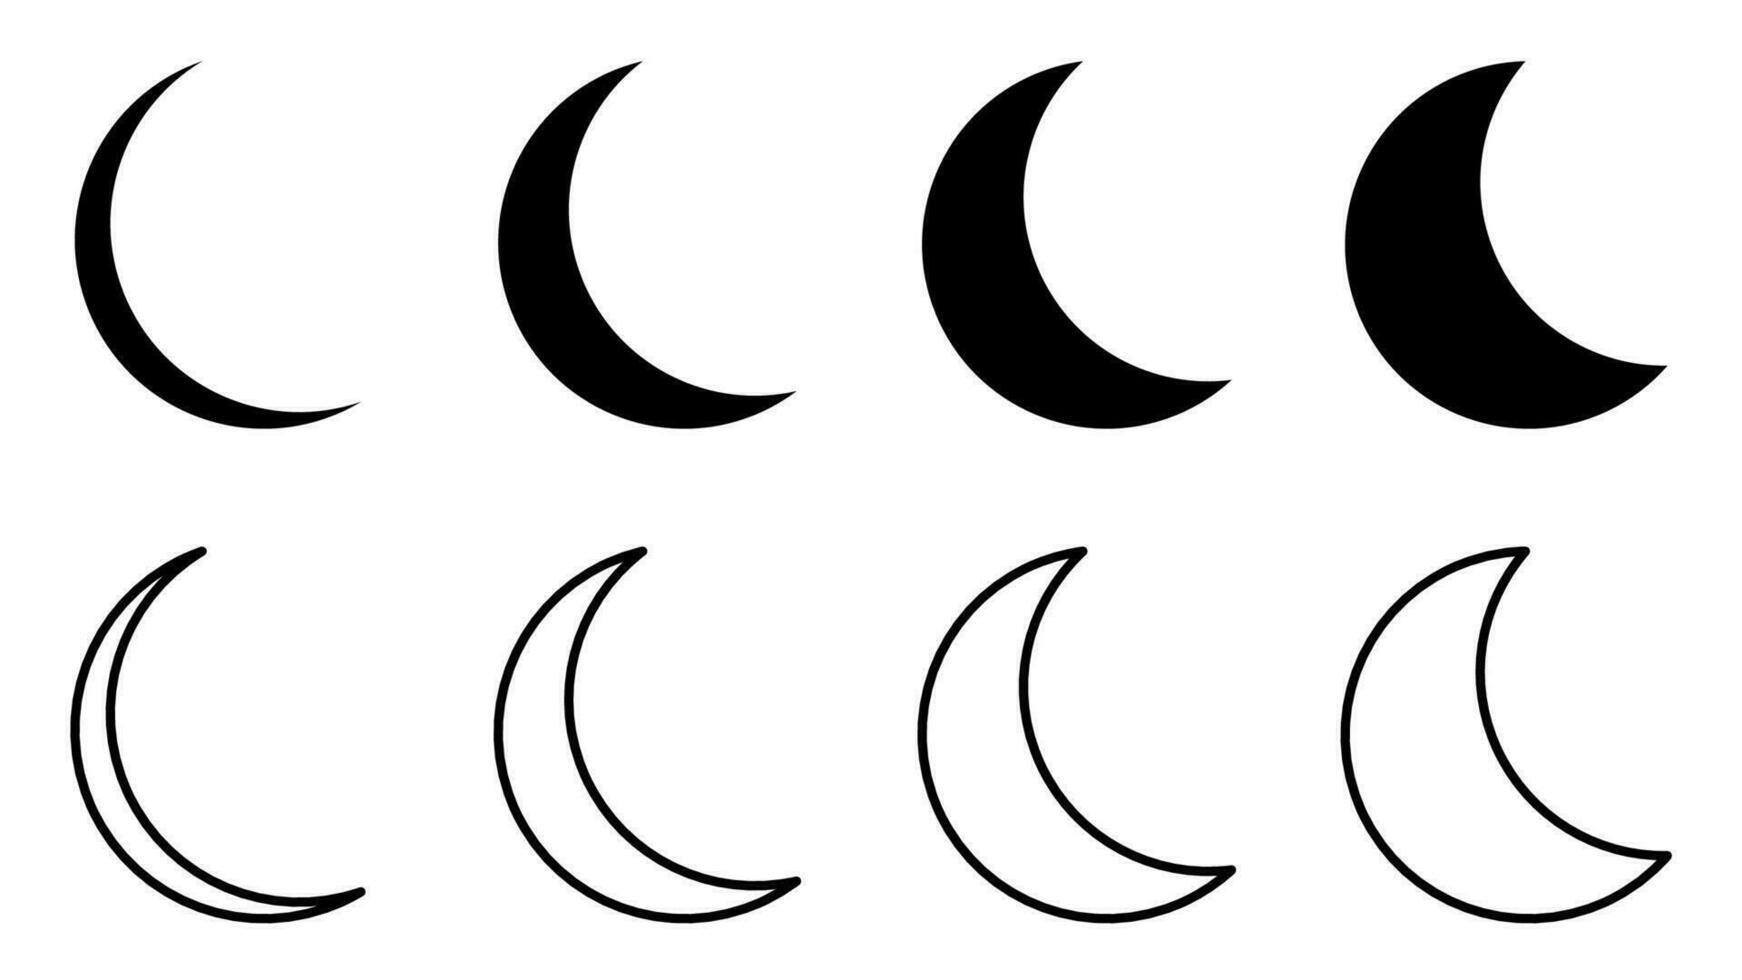 Crescent silhouette isolated, Outline crescent in different shapes vector